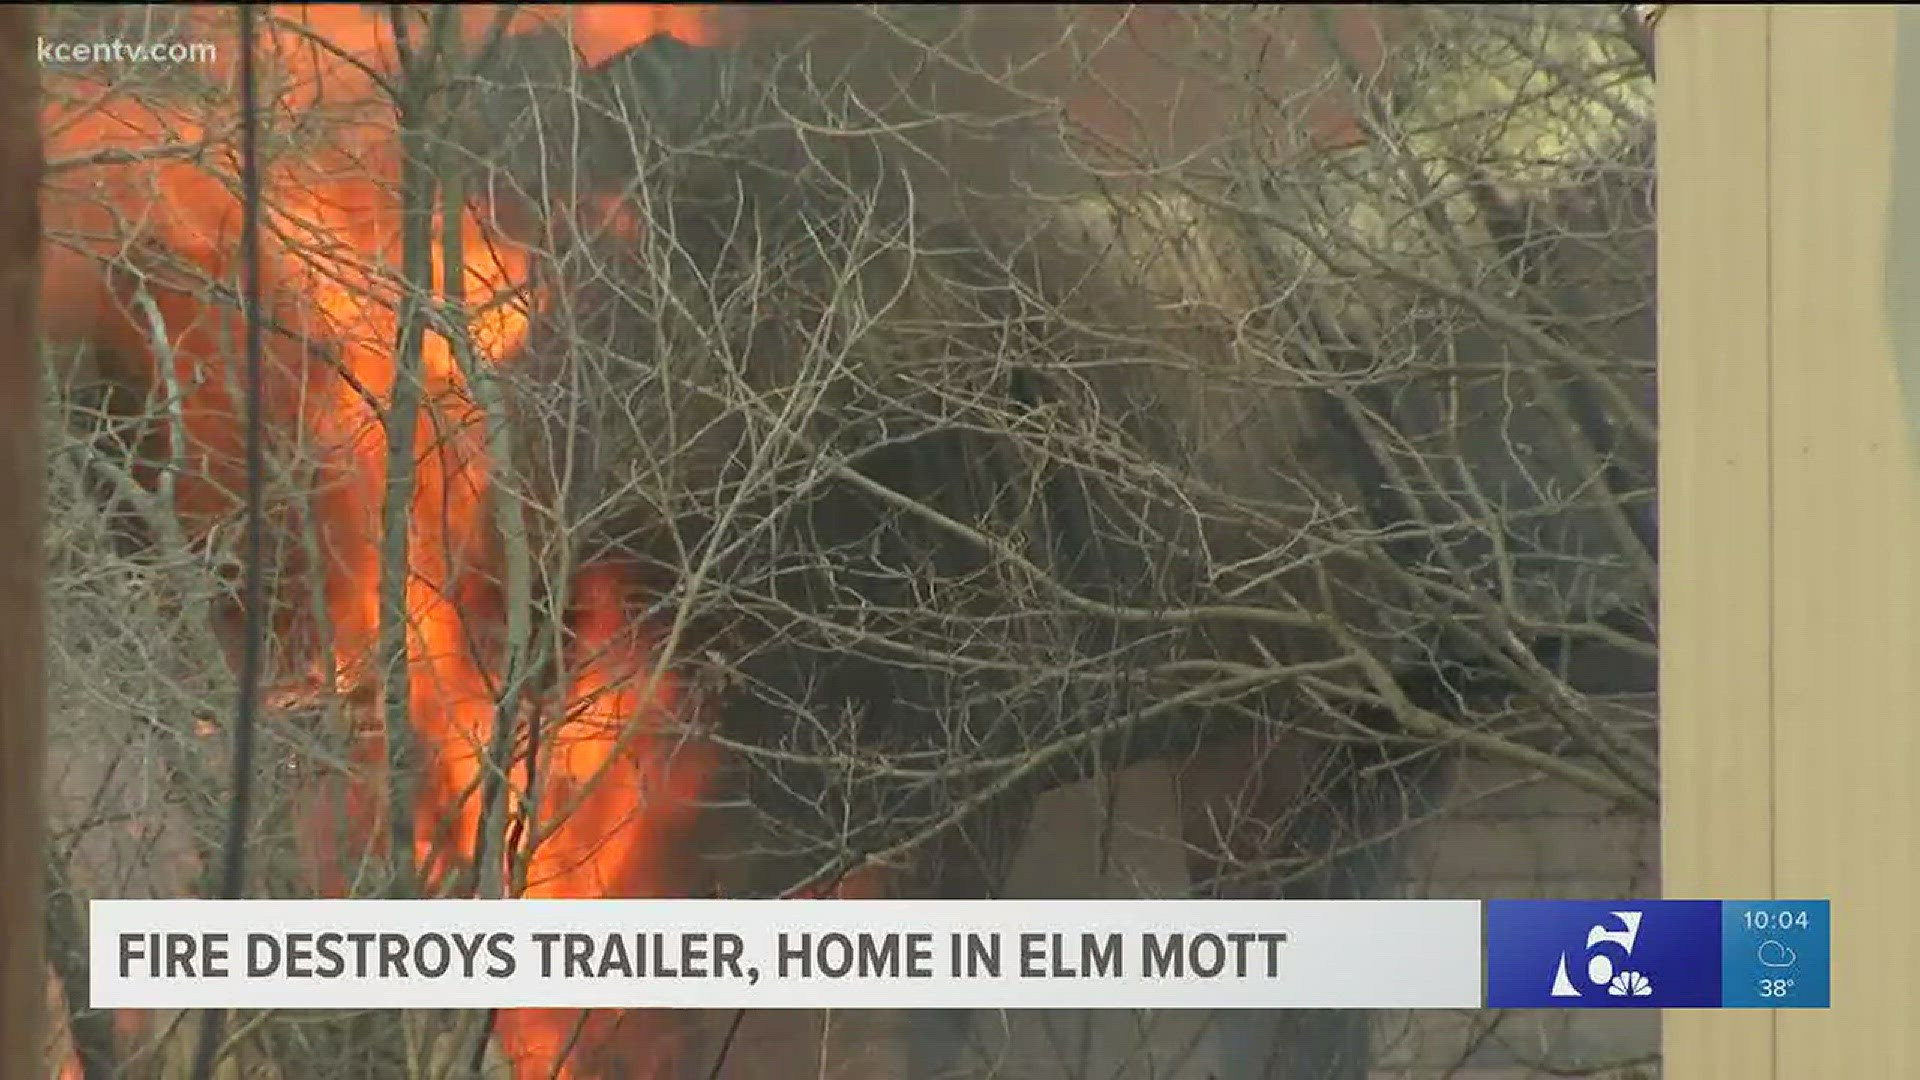 An investigation is underway after a fire destroyed an RV trailer and a home in Elm Mott.